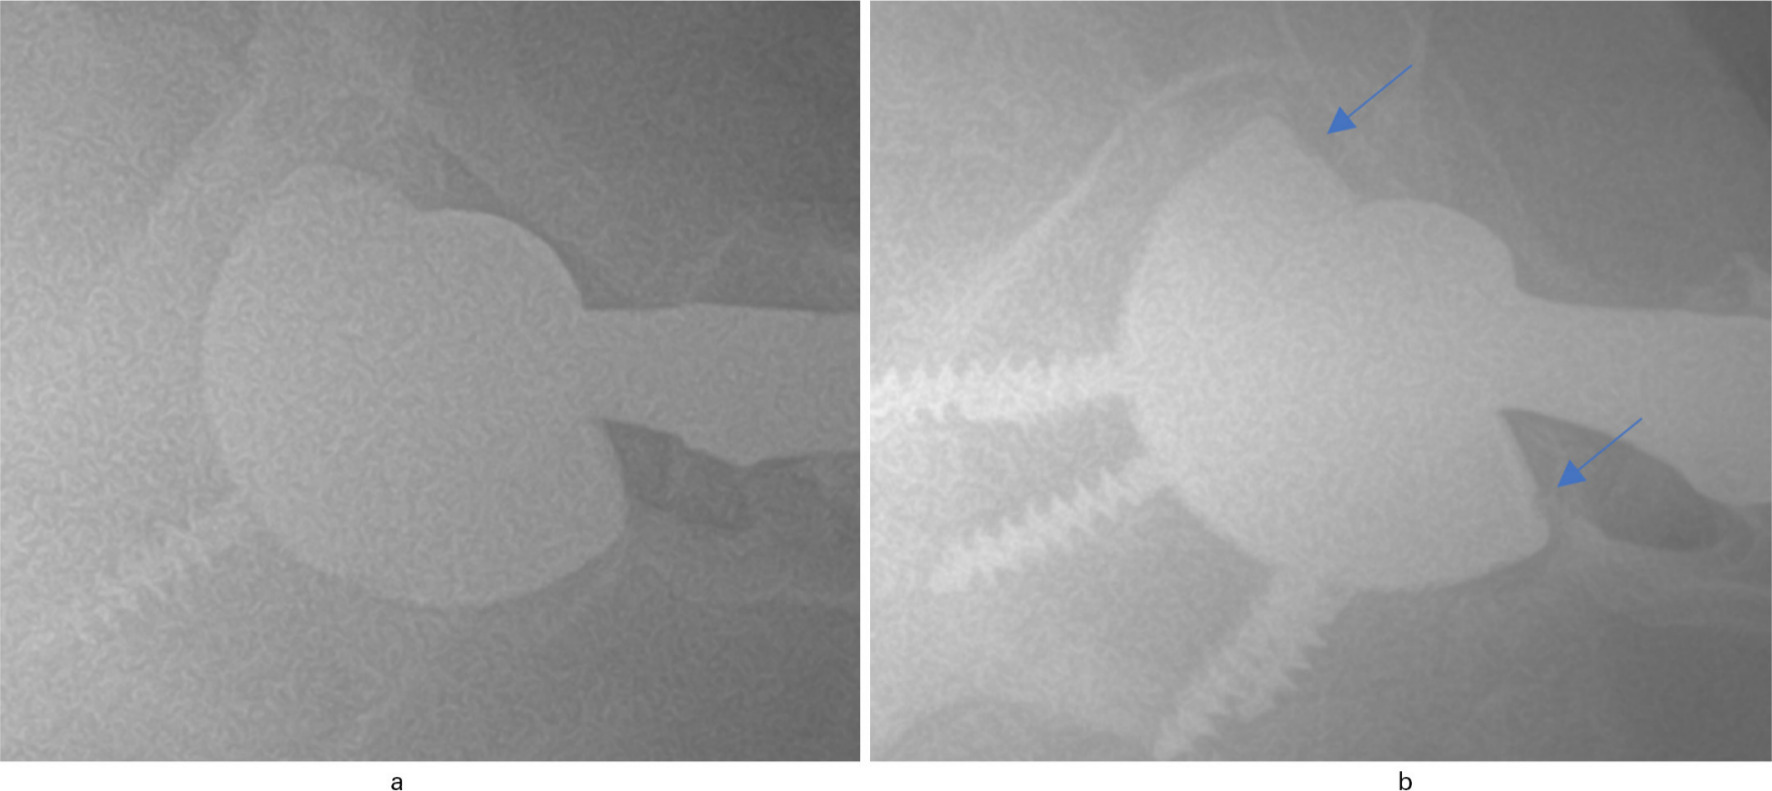 Fig. 2 
          A well-malseated Zimmer Biomet G7 implant versus a malseated Zimmer Biomet G7 implant. a) A non-malseated Biomet G7 implant. A well-malseated Zimmer Biomet G7 implant versus a malseated Zimmer Biomet G7 implants. b) Malseated Zimmer Biomet G7 implants with gaps seen along the implant surface.
        